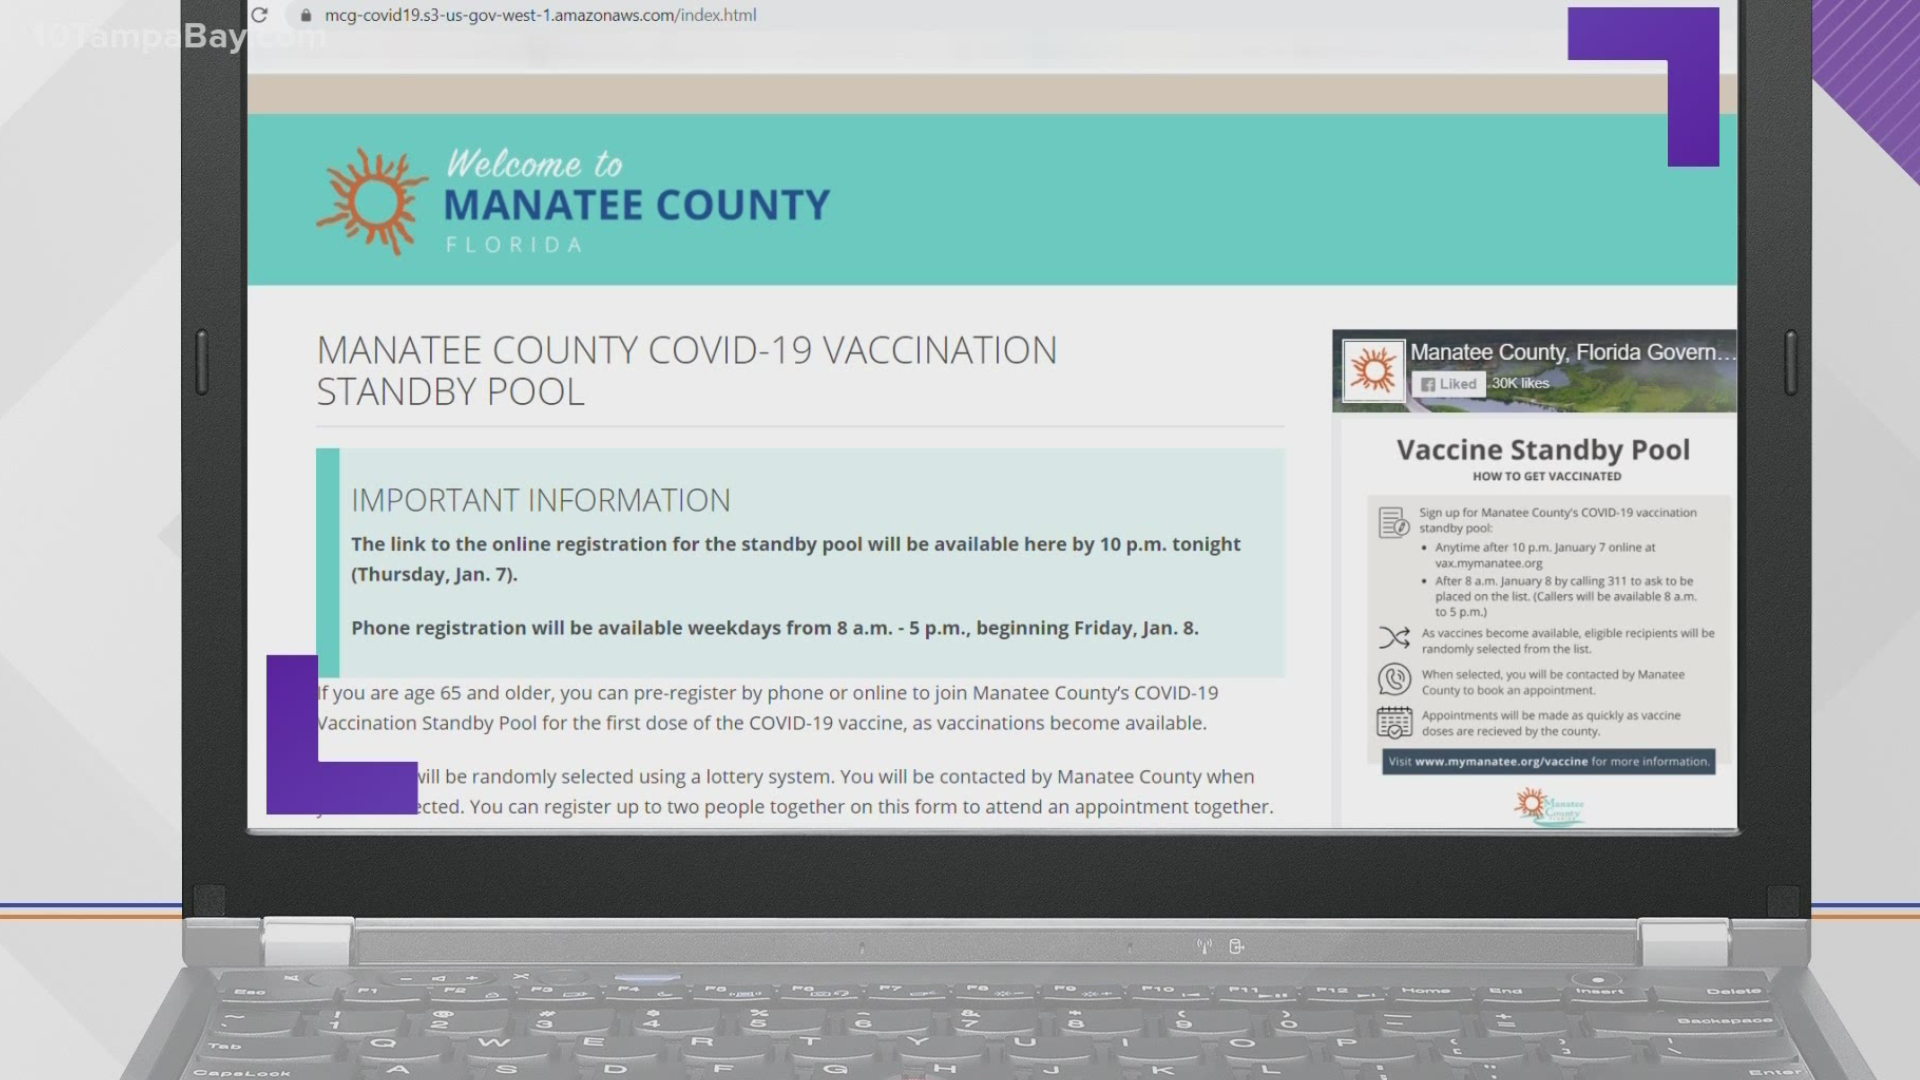 The county's 311 call center will assist seniors 65 and older to book appointments when vaccinations become available.